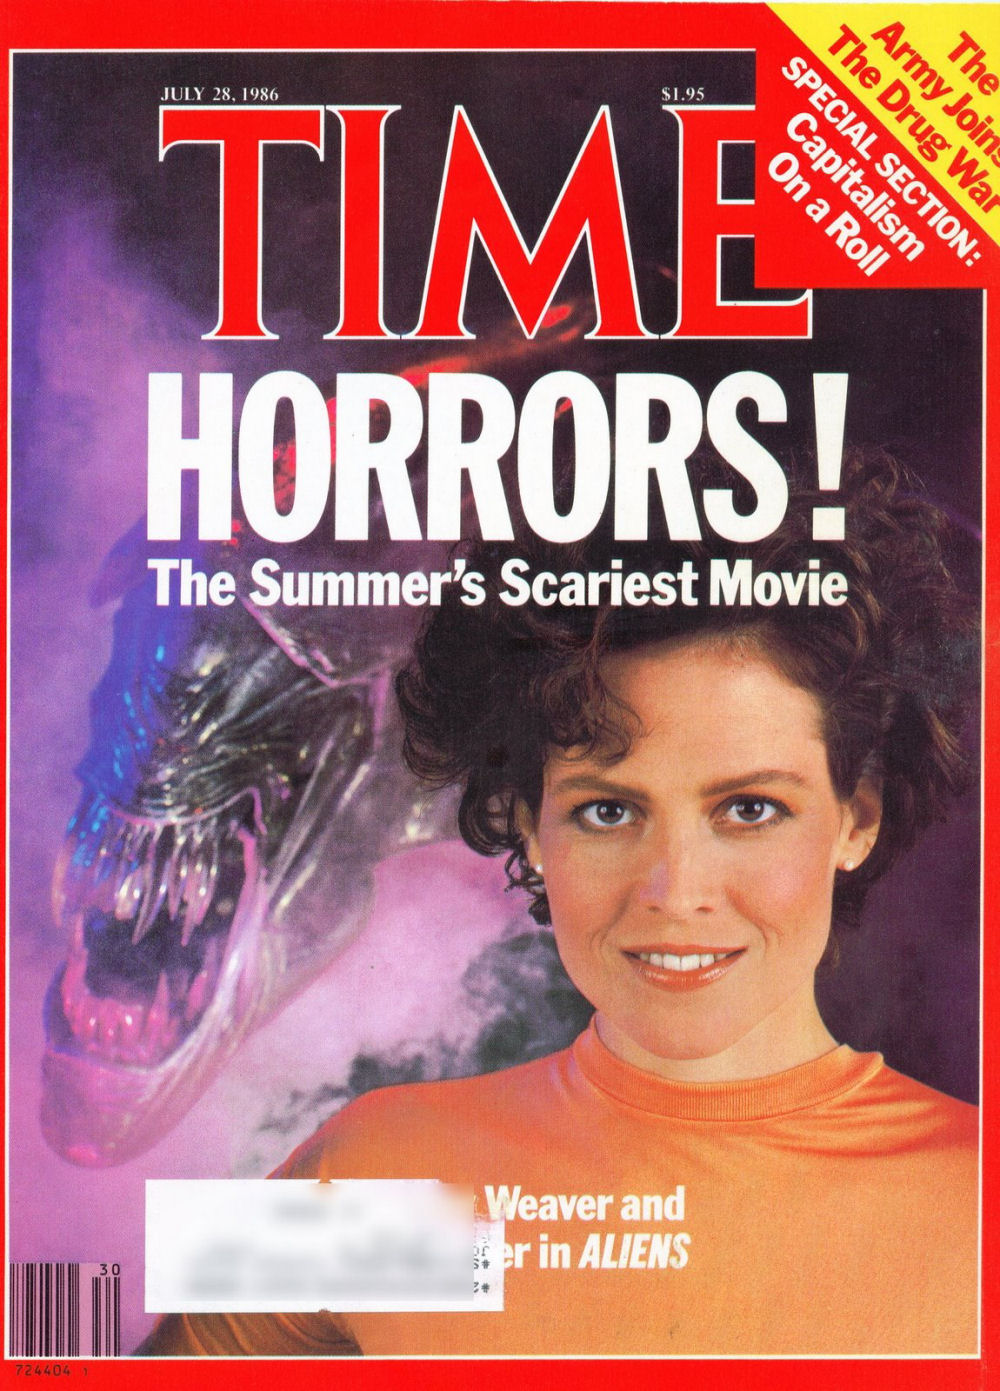 Aliens - TIME Magazine July 28, 1986 - Horrors! - PAGE 1
Keywords: ;media_review